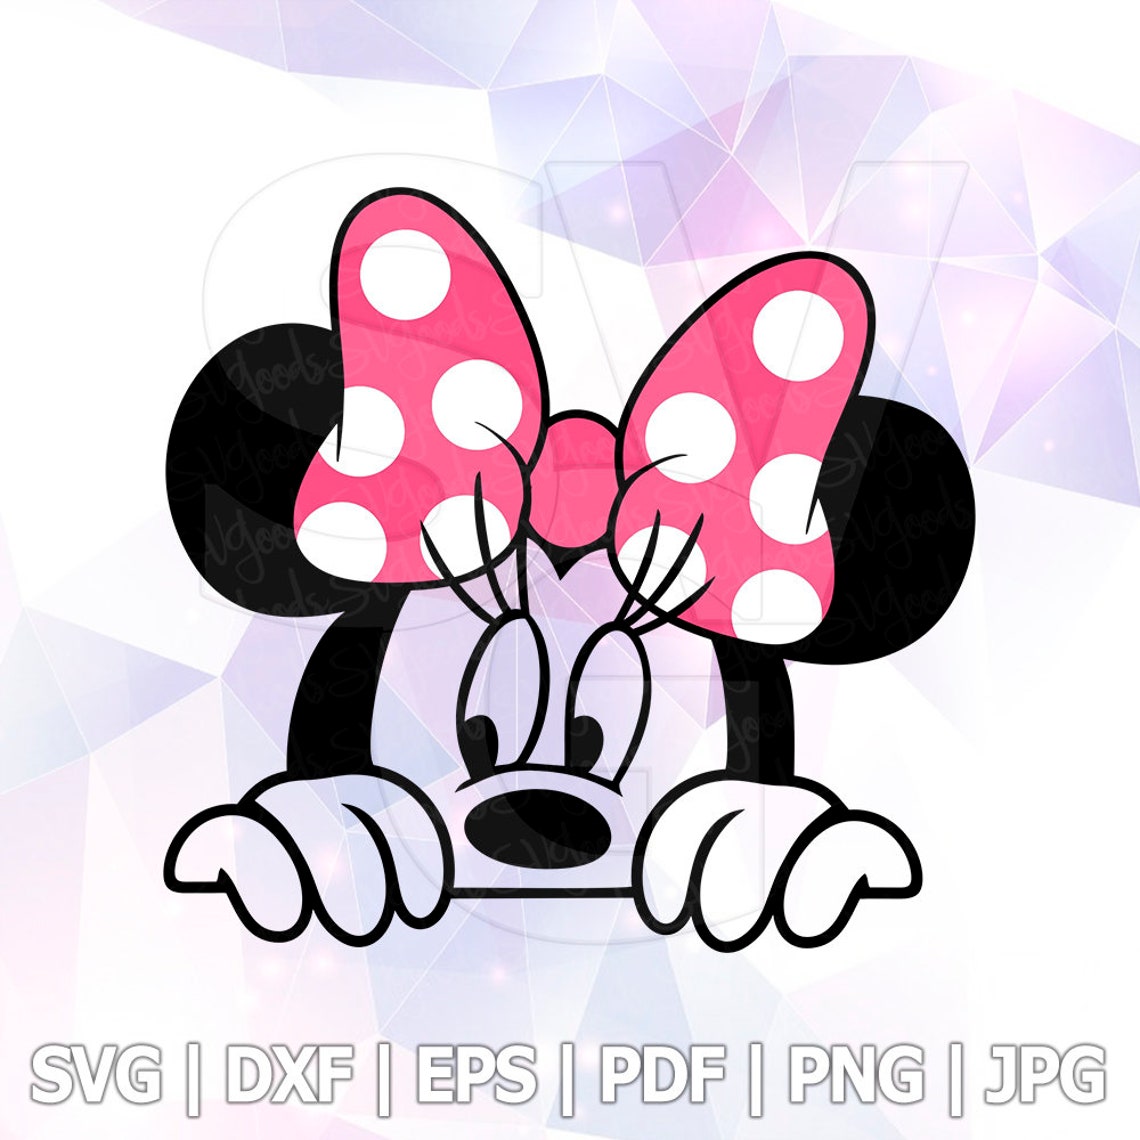 Minnie Mouse Peeking Bow Dot Layered SVG DXF Vector Silhouette | Etsy